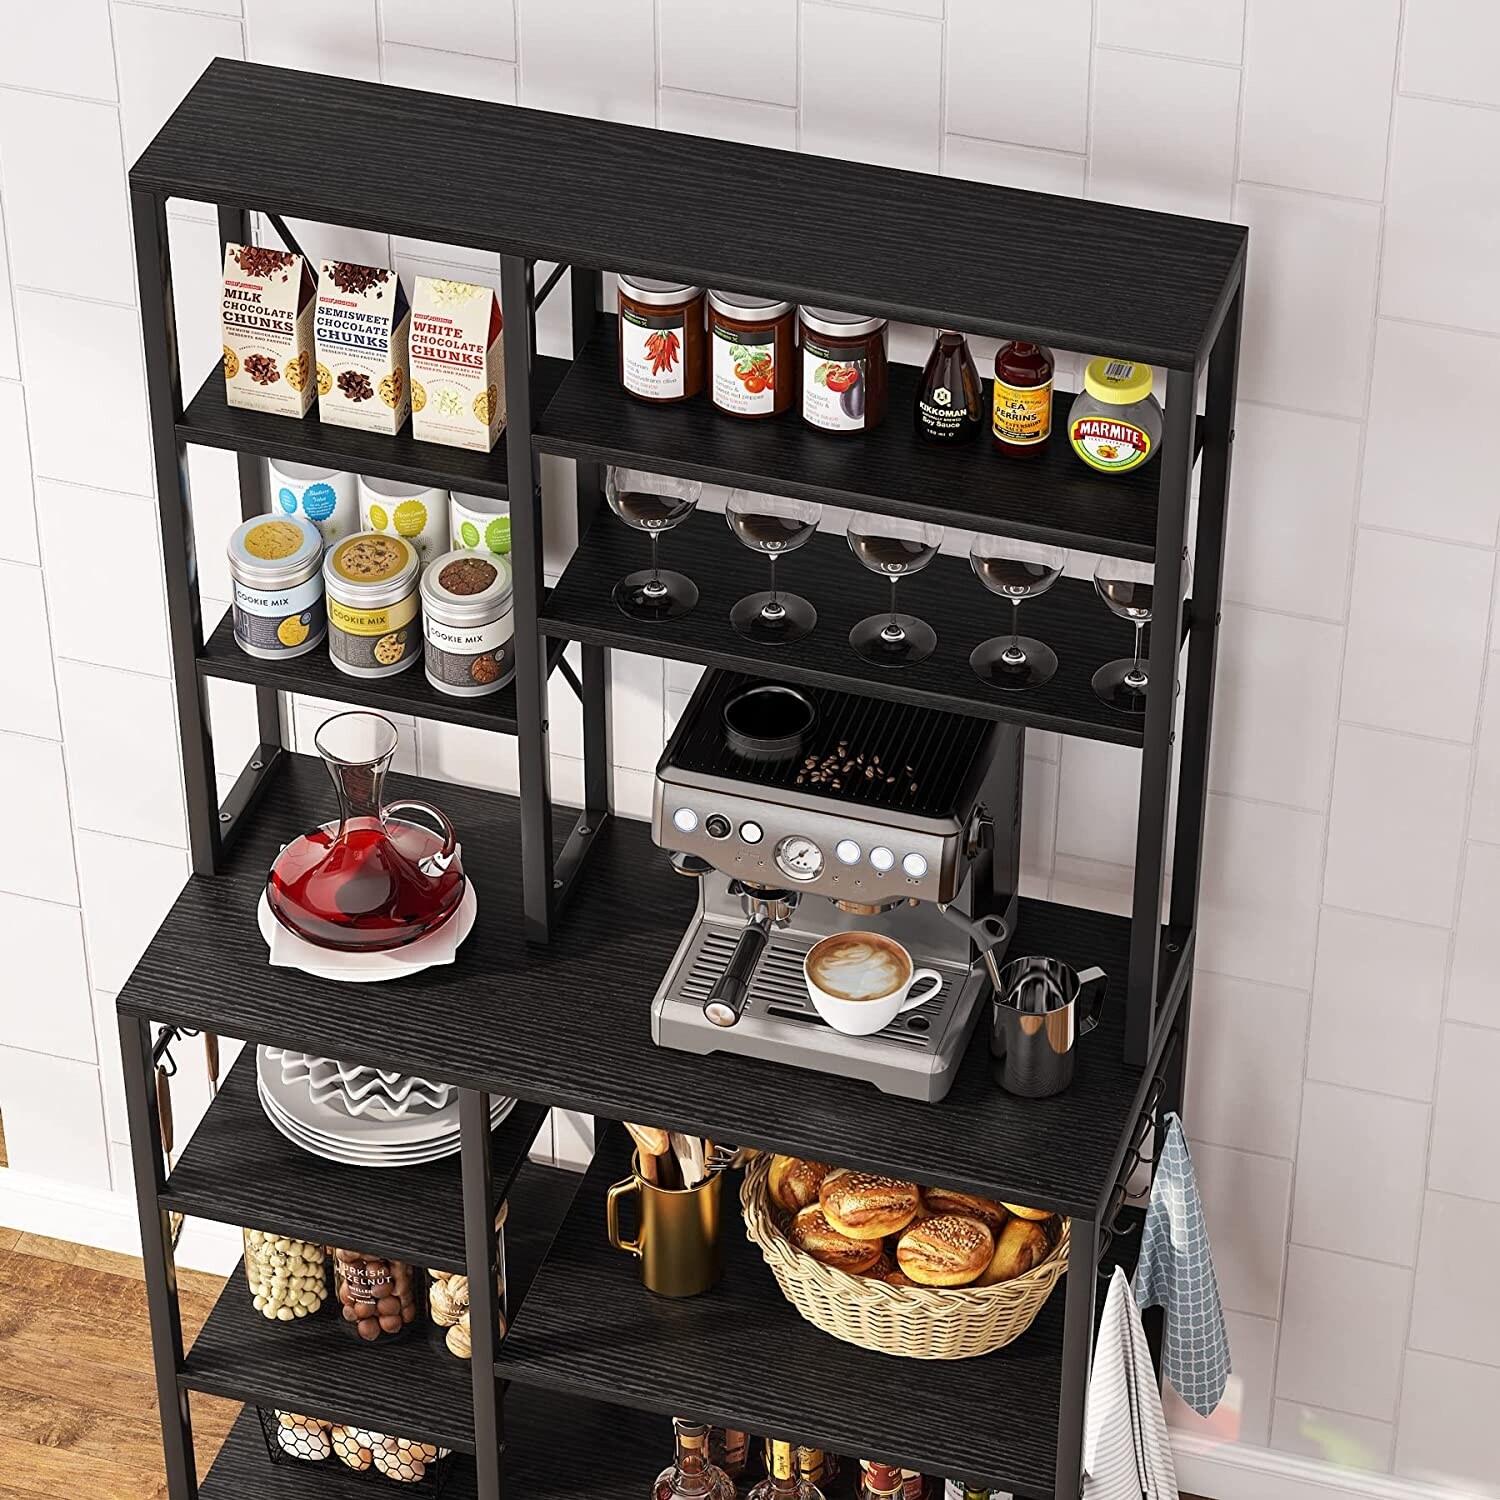 https://ak1.ostkcdn.com/images/products/is/images/direct/b127a0a9e8687977149ab245c0efe047da108281/10-Tiers-Kitchen-Bakers-Rack%2C-Floor-Standing-Kitchen-Utility-Storage-Shelf%2C-Microwave-Oven-Stand-with-10-S-Shaped-Hooks.jpg